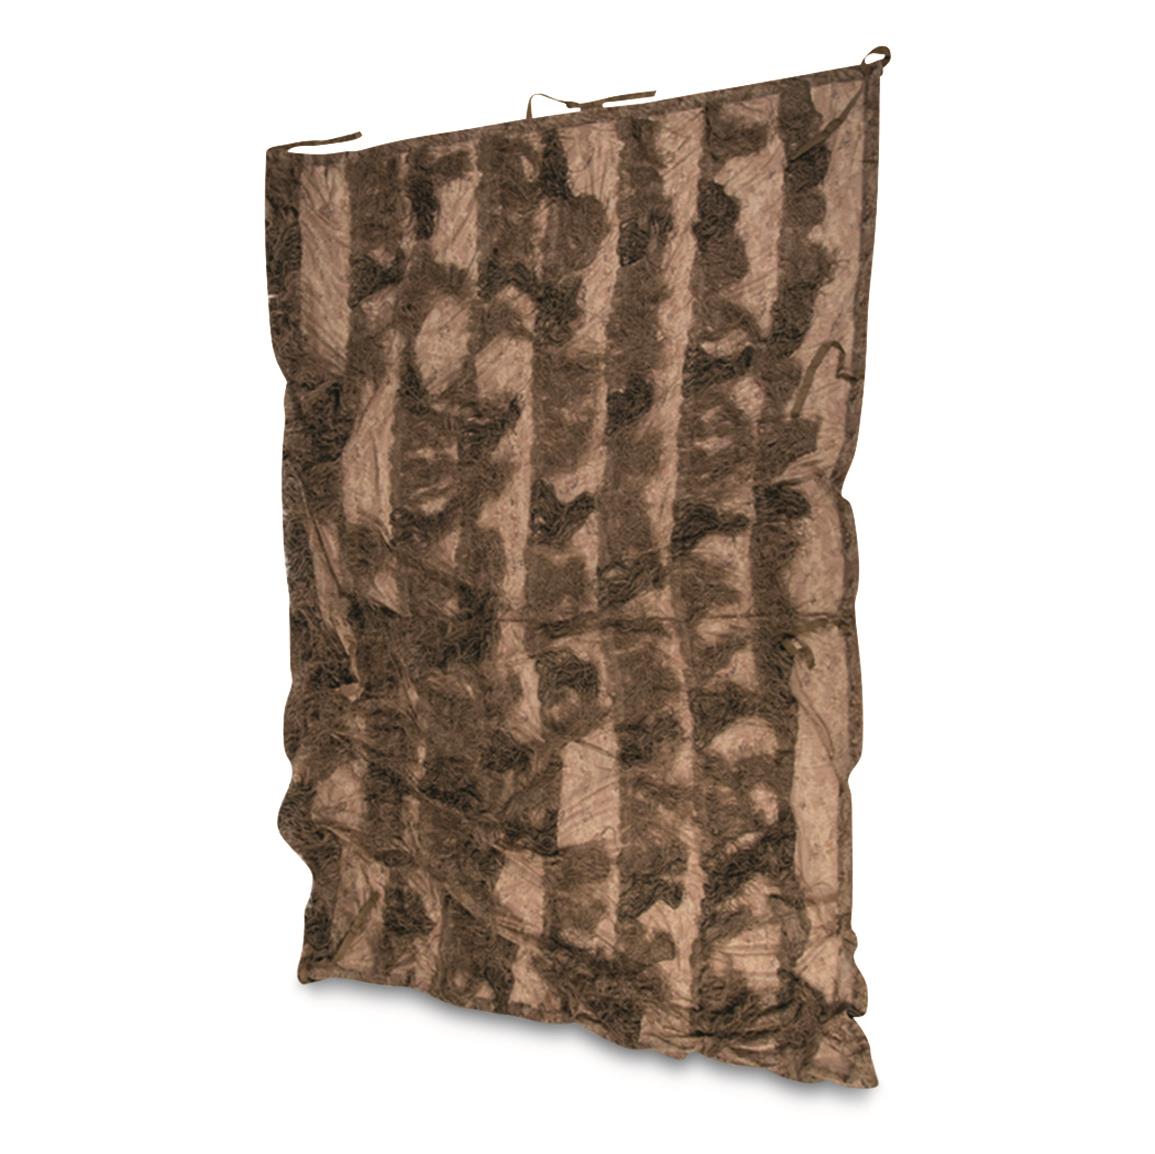 Mil-Tec Camouflage Ghillie Cover, 6' x 9', Desert